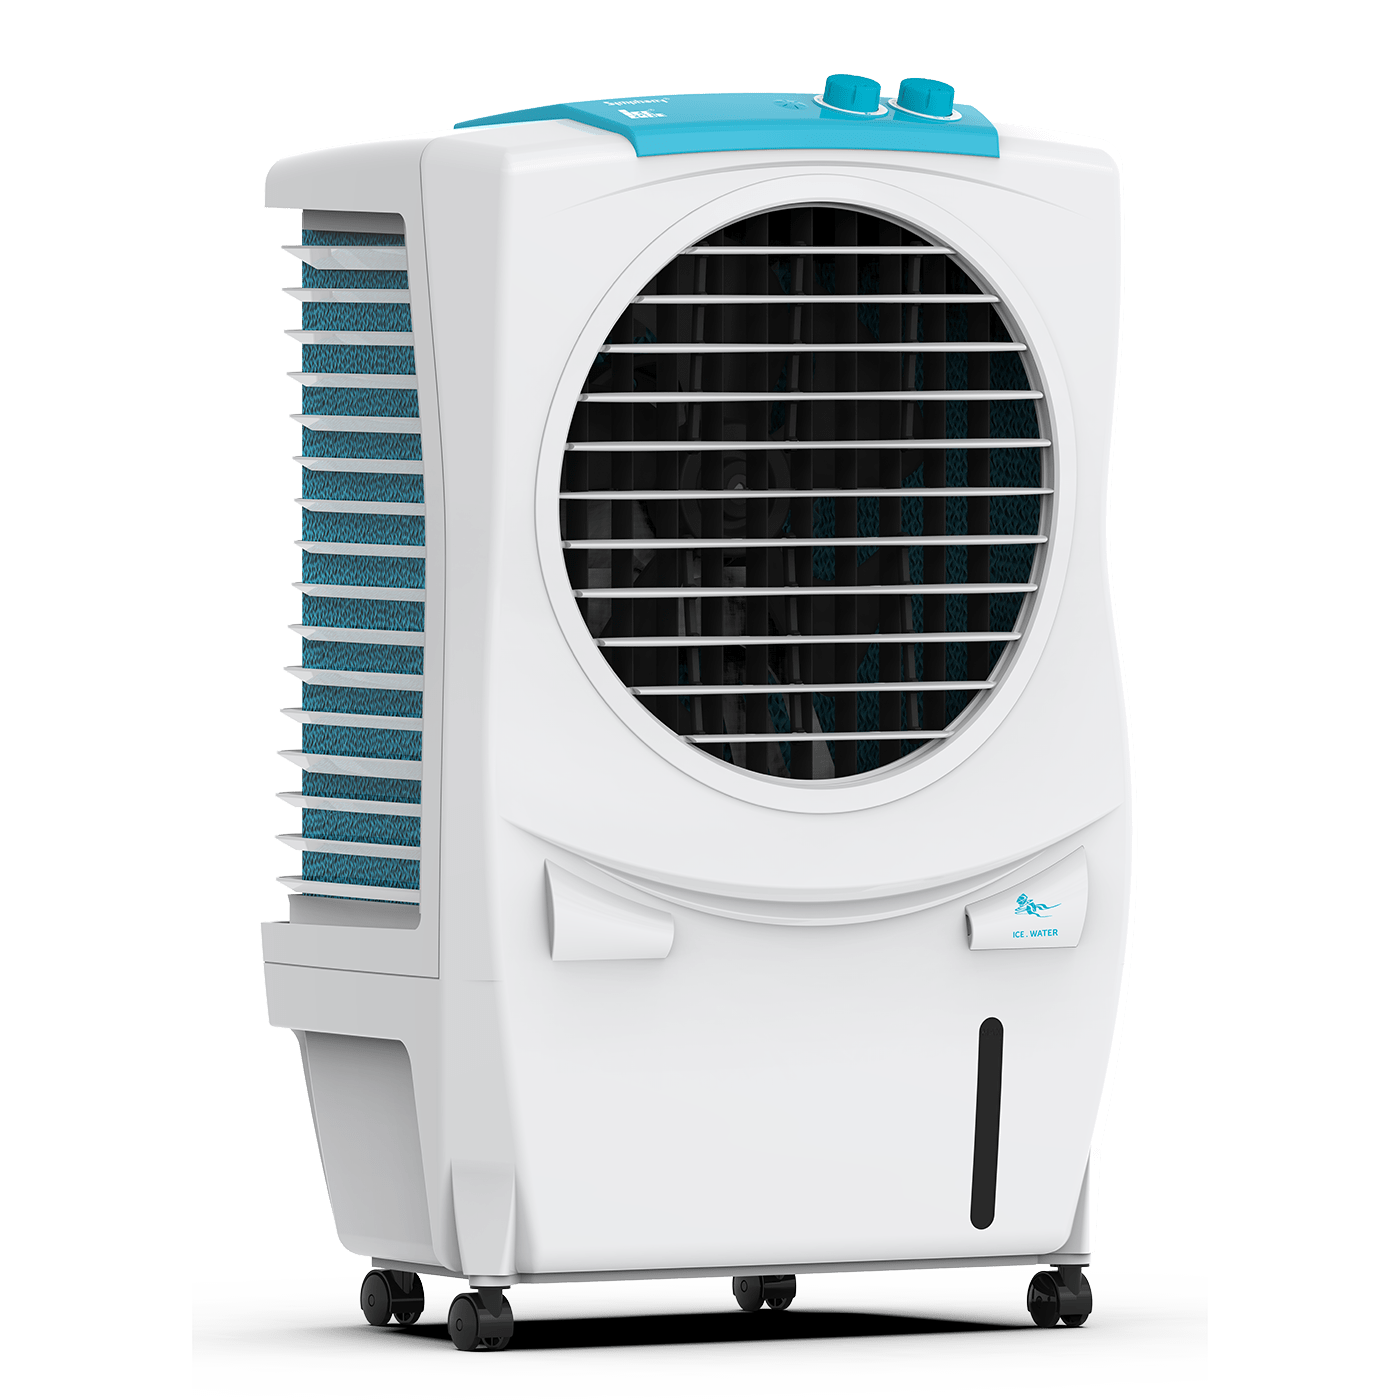 Ice Cube 17 XL Personal Air Cooler with Powerful Fan